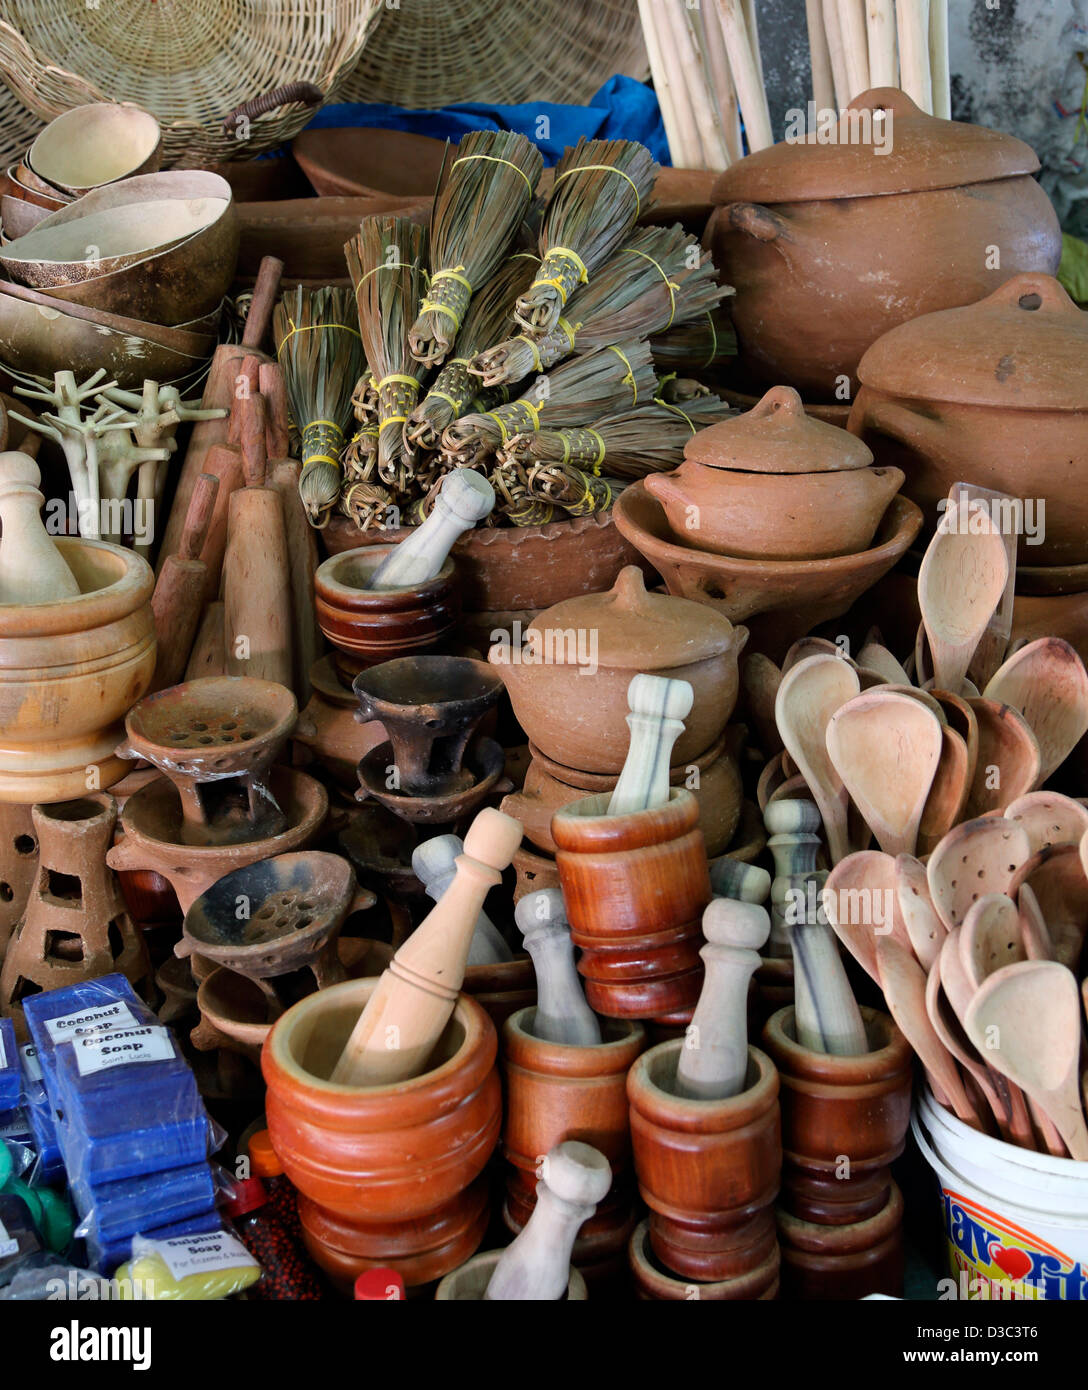 CARIBBEAN KITCHEN UTENSILS AND CRAFTS,MARKET STALL,CASTRIES,ST.LUCIA Stock Photo